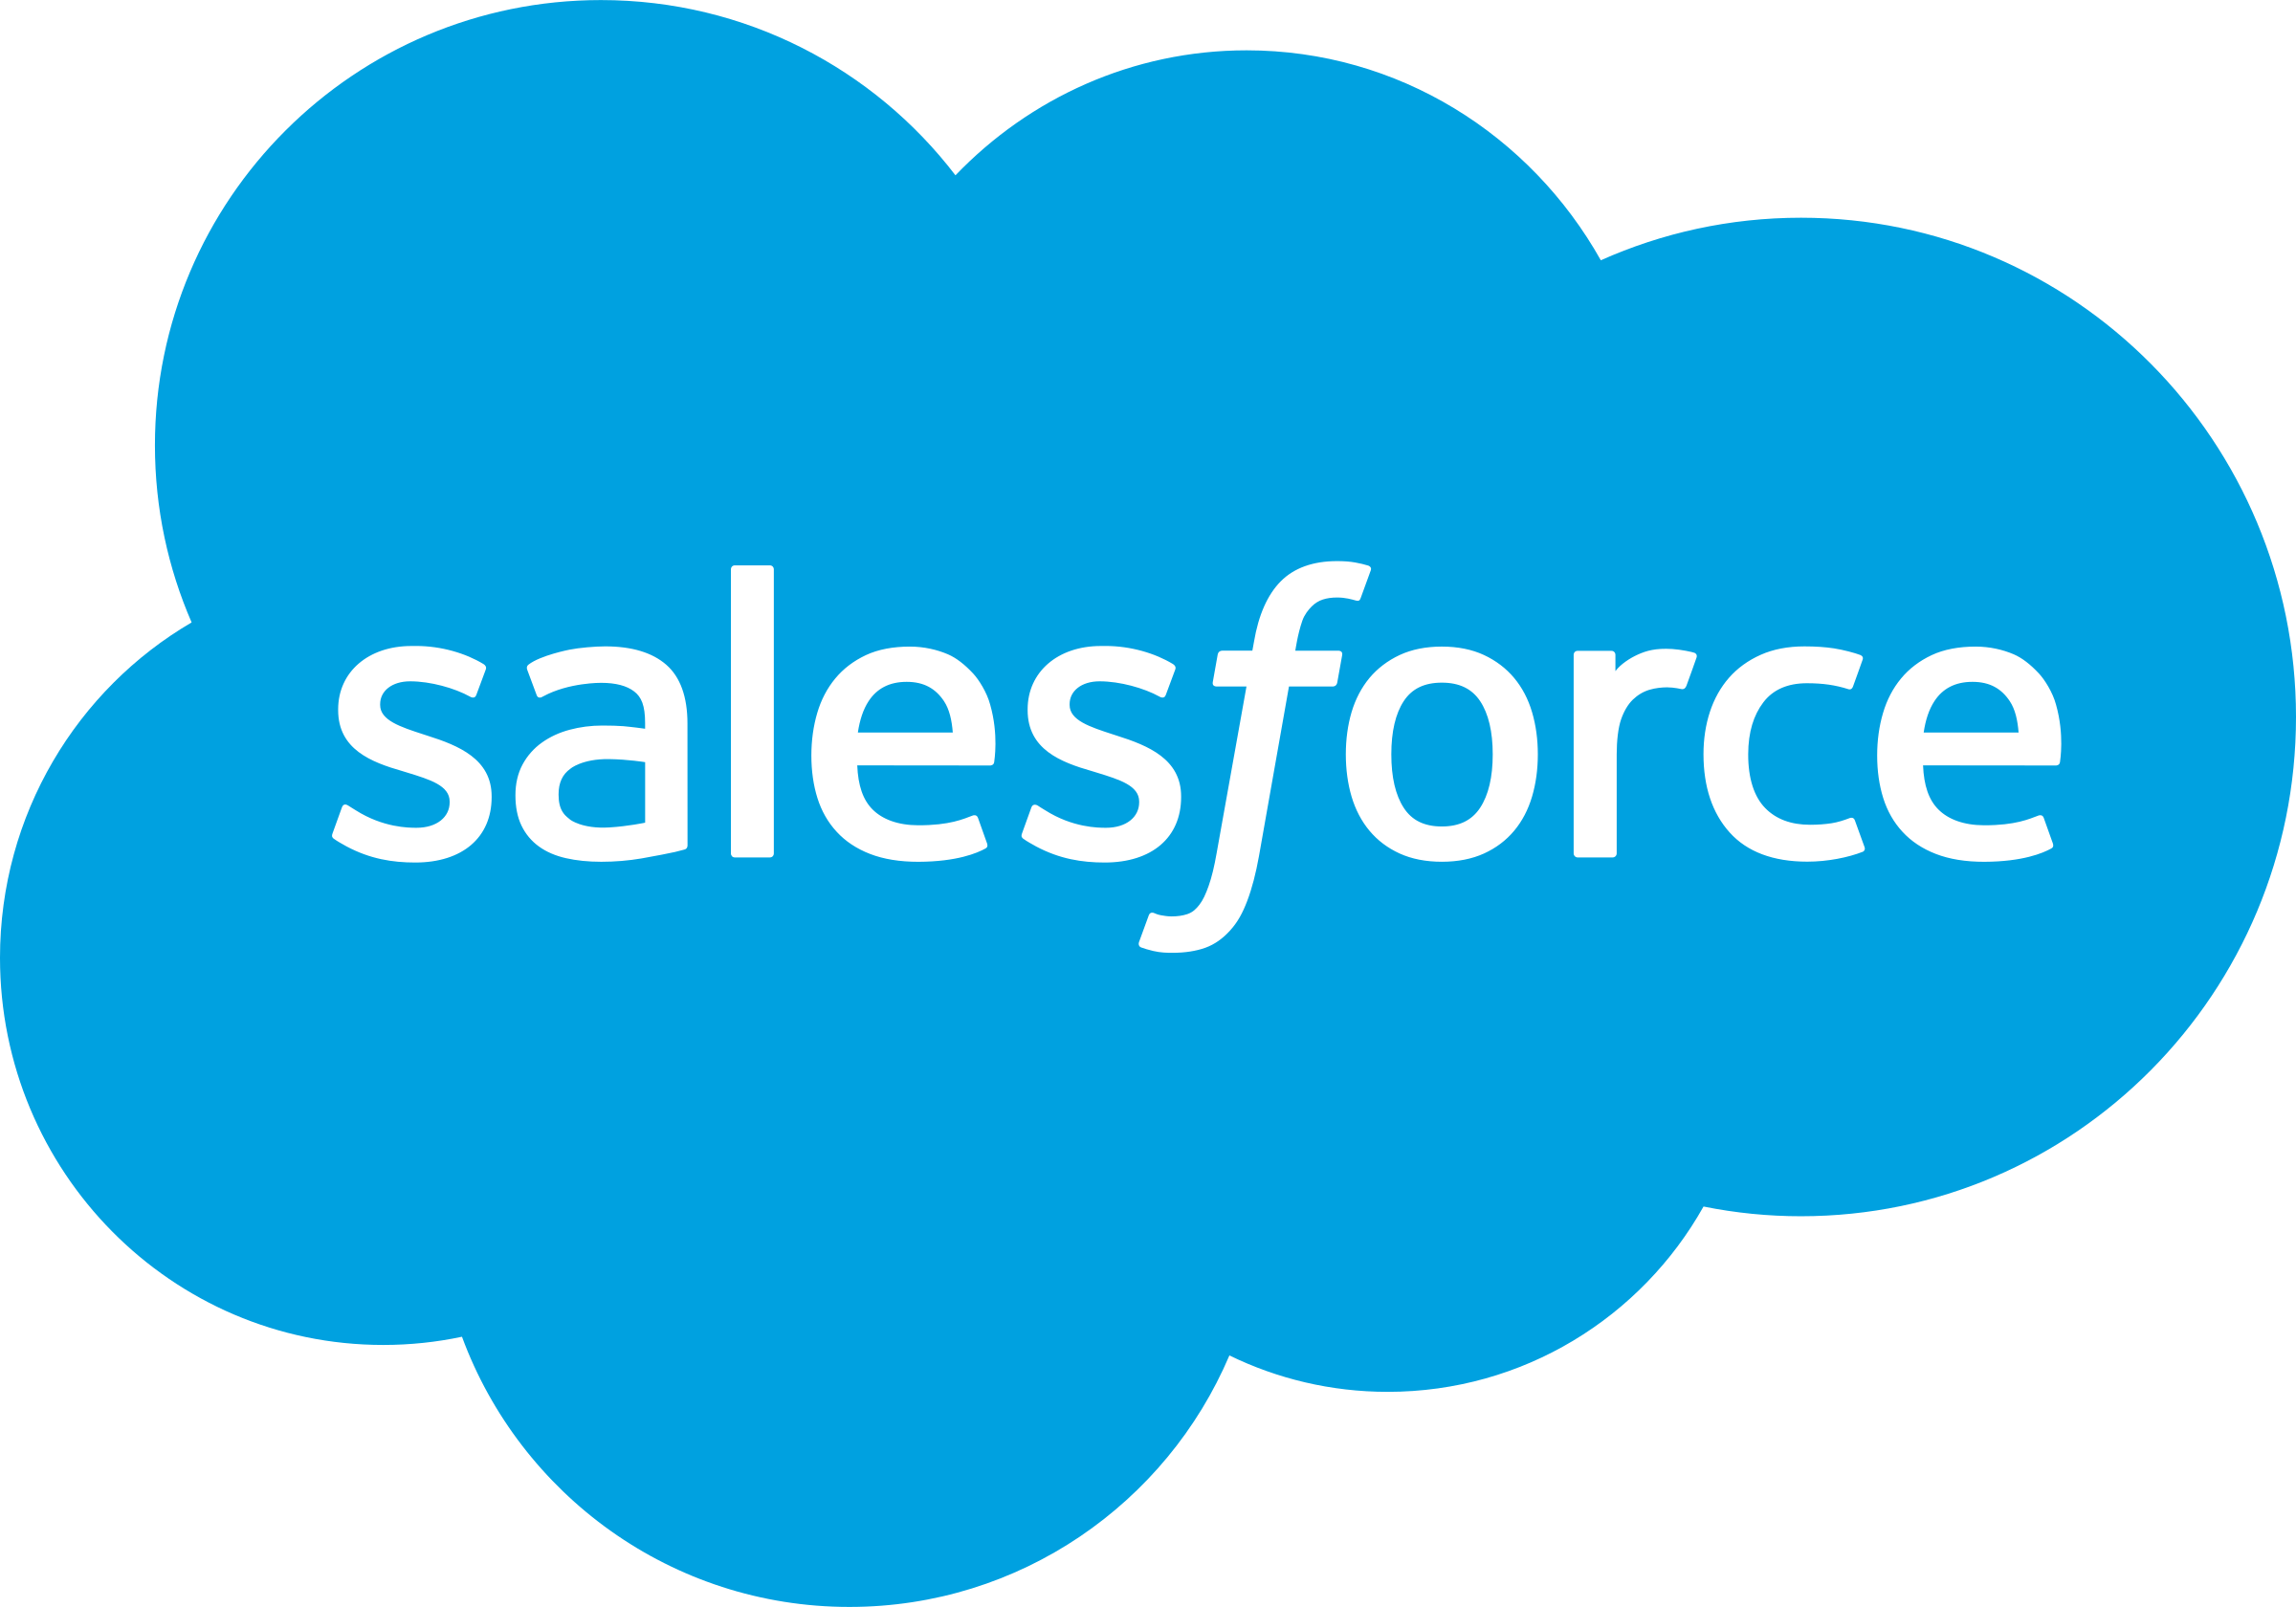 image_of_the_salesforce_logo.png